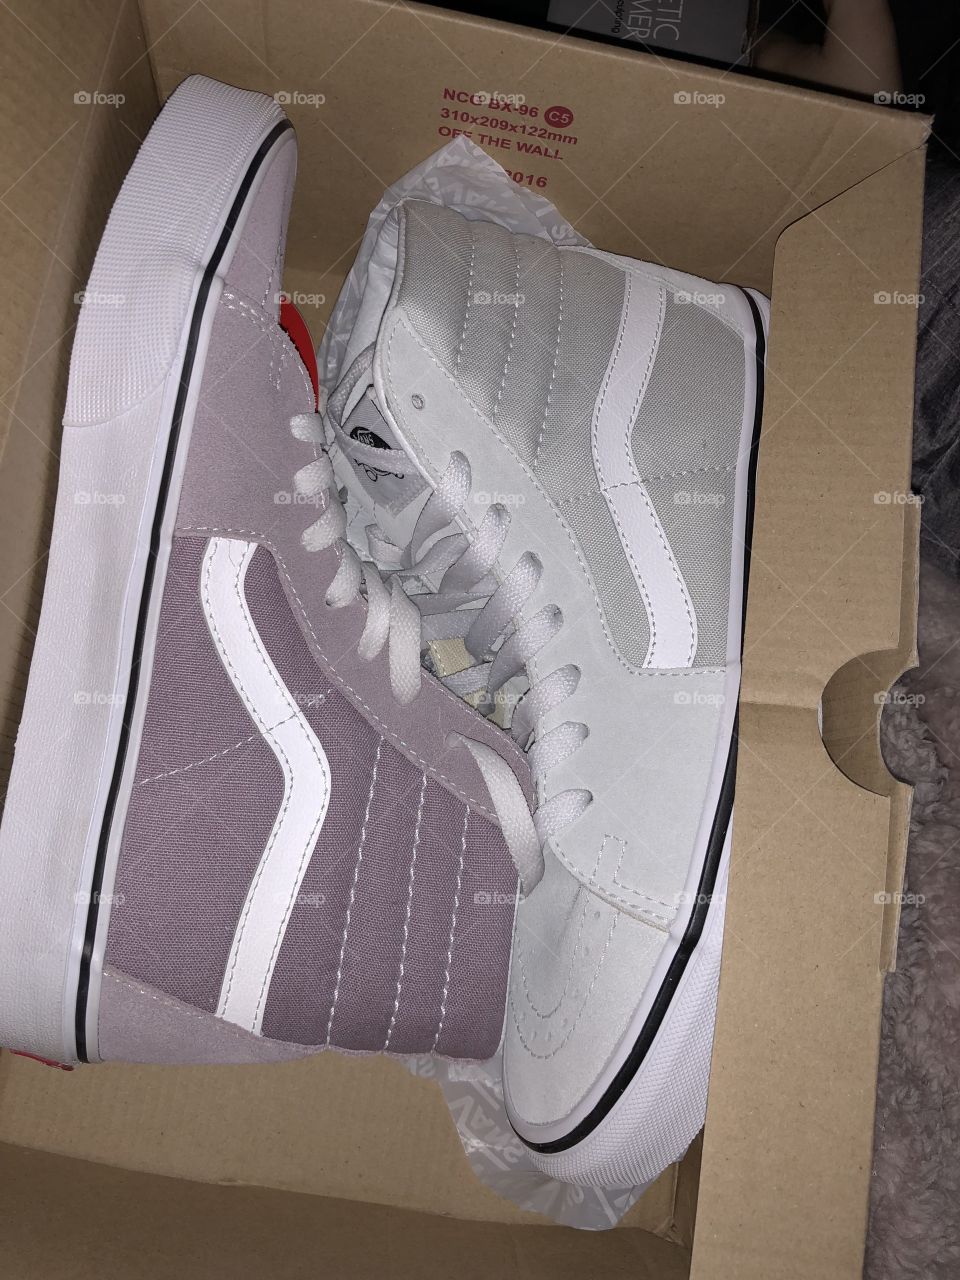 A pair of Vans shoes I got a nice deal on since they didn’t have the matching shoe of either color